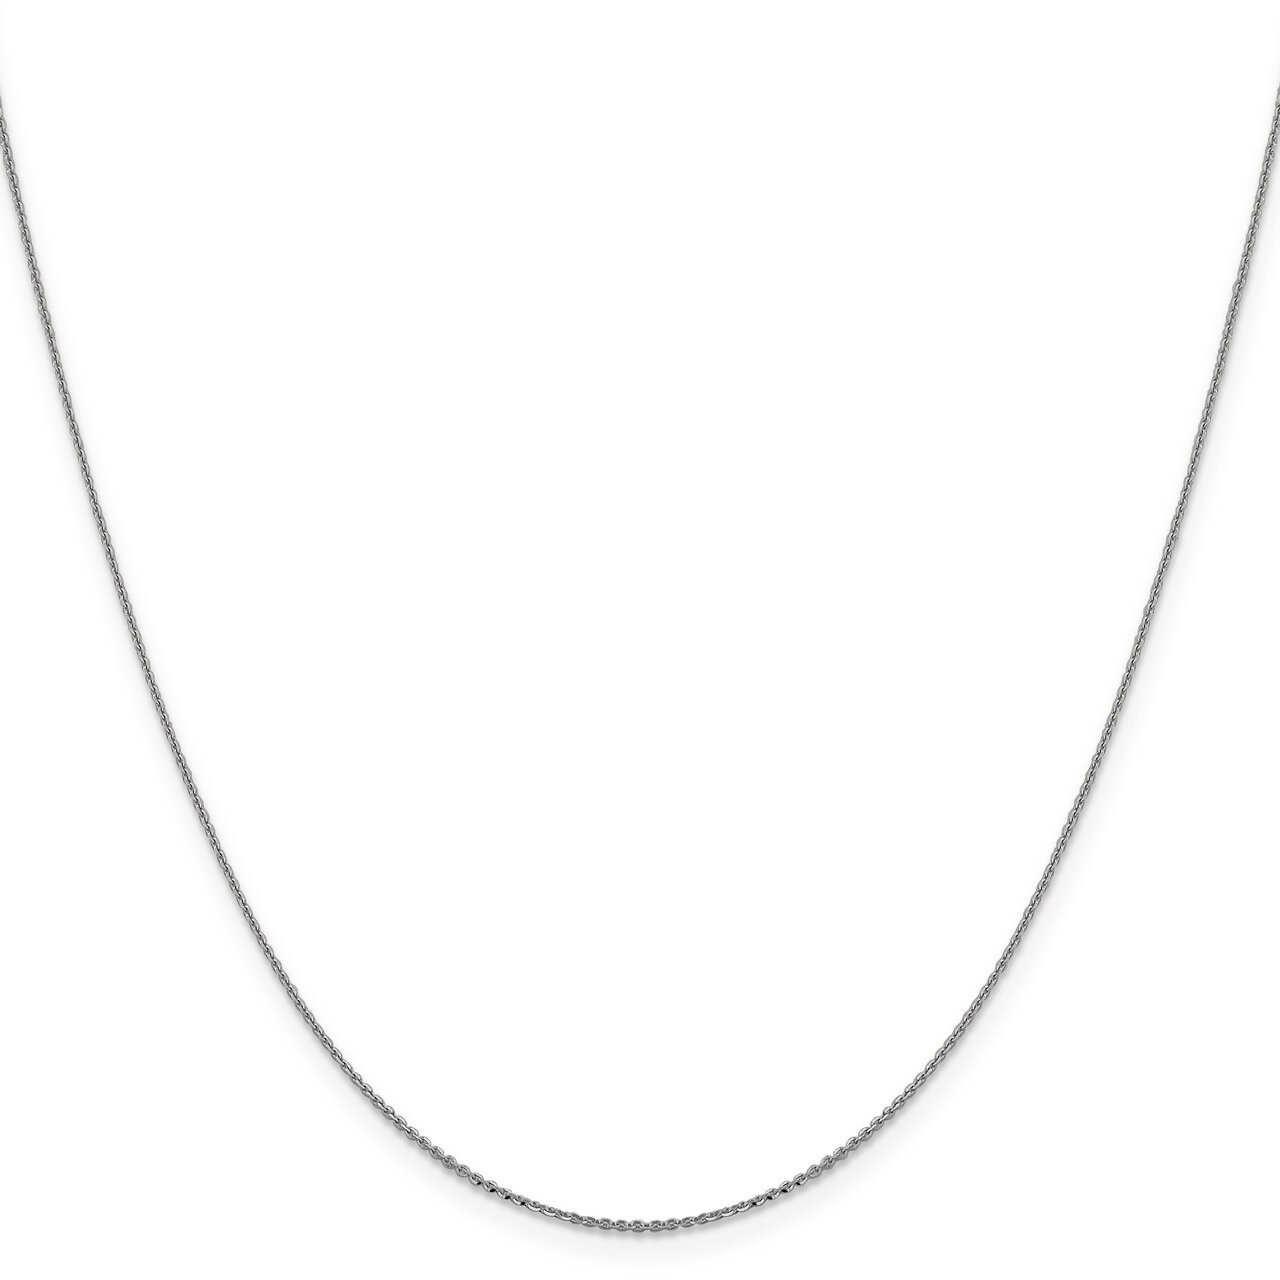 1 mm Diamond-cut Cable Chain 20 Inch 14K White Gold HB-1254-20